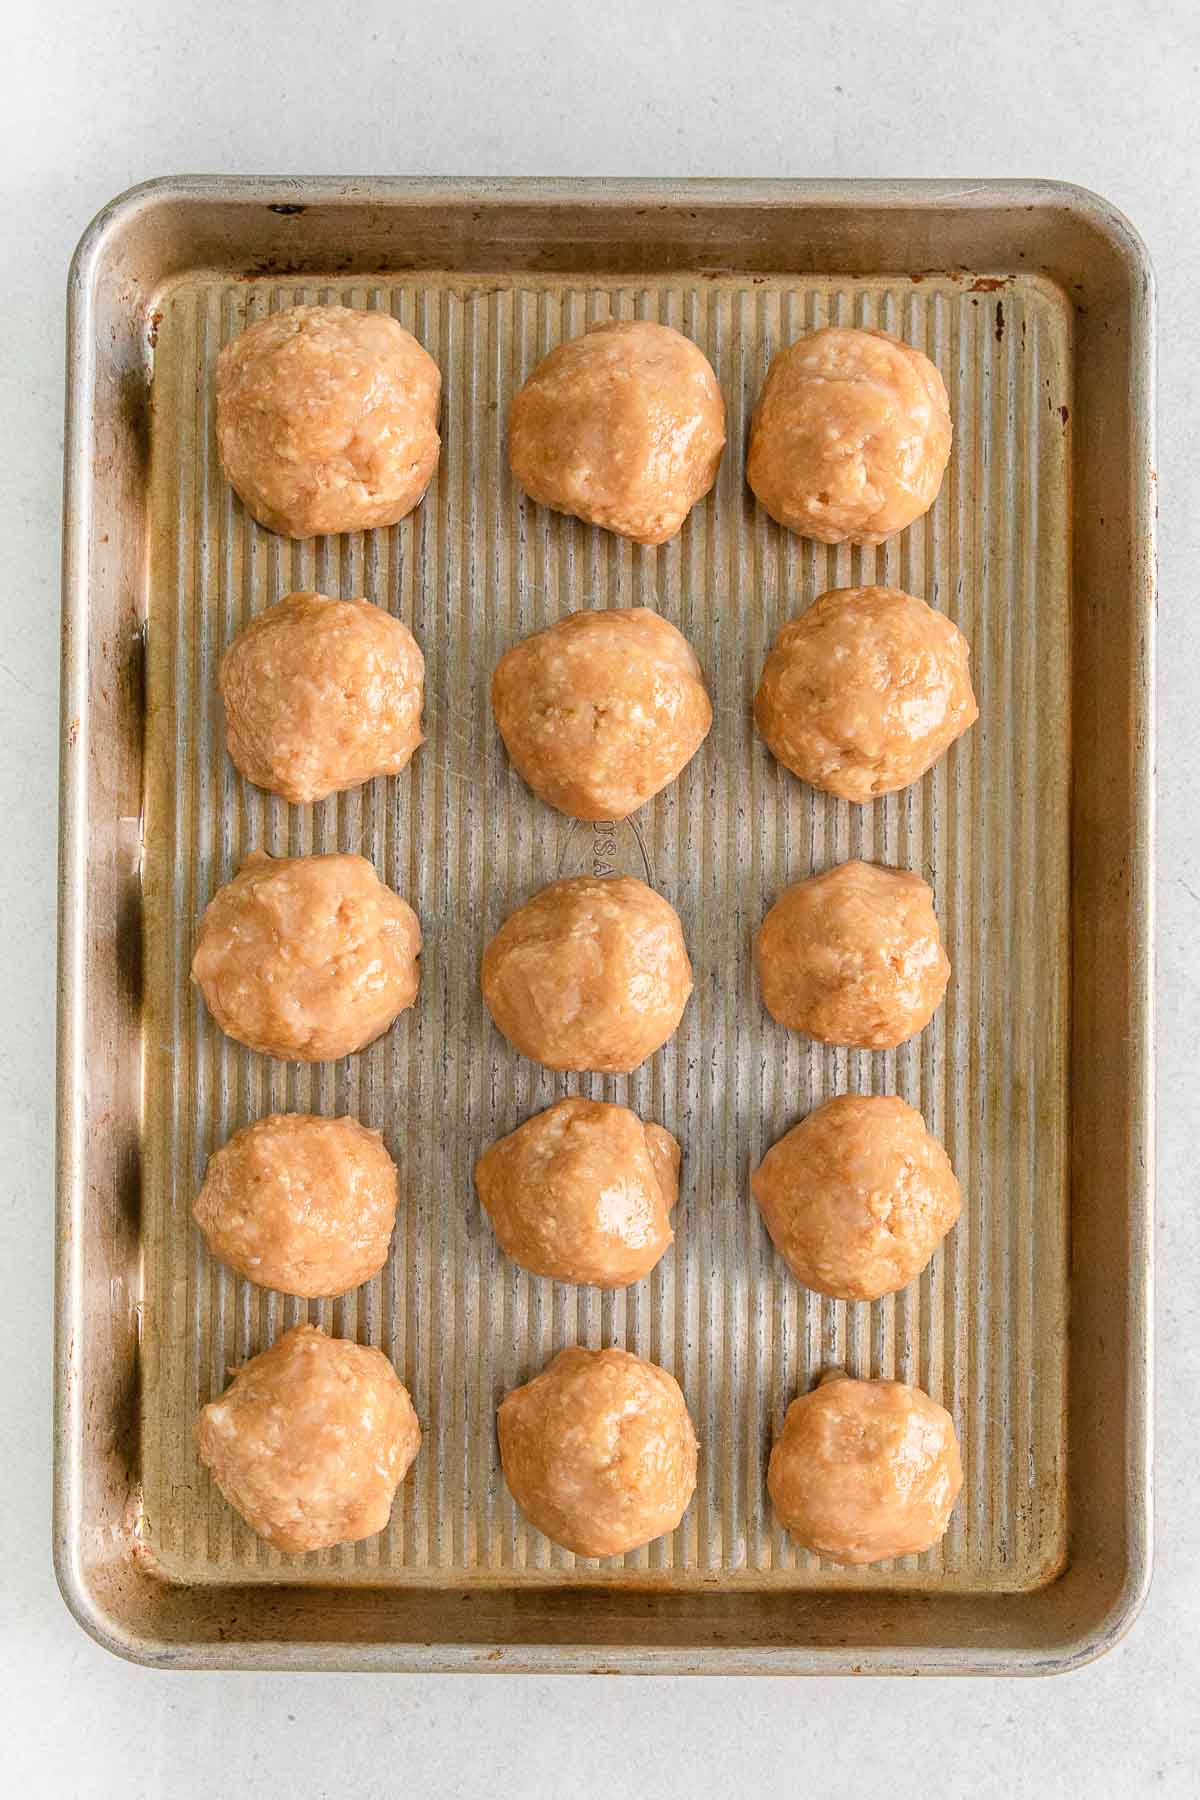 rolled chicken meatballs laid out on baking sheet.